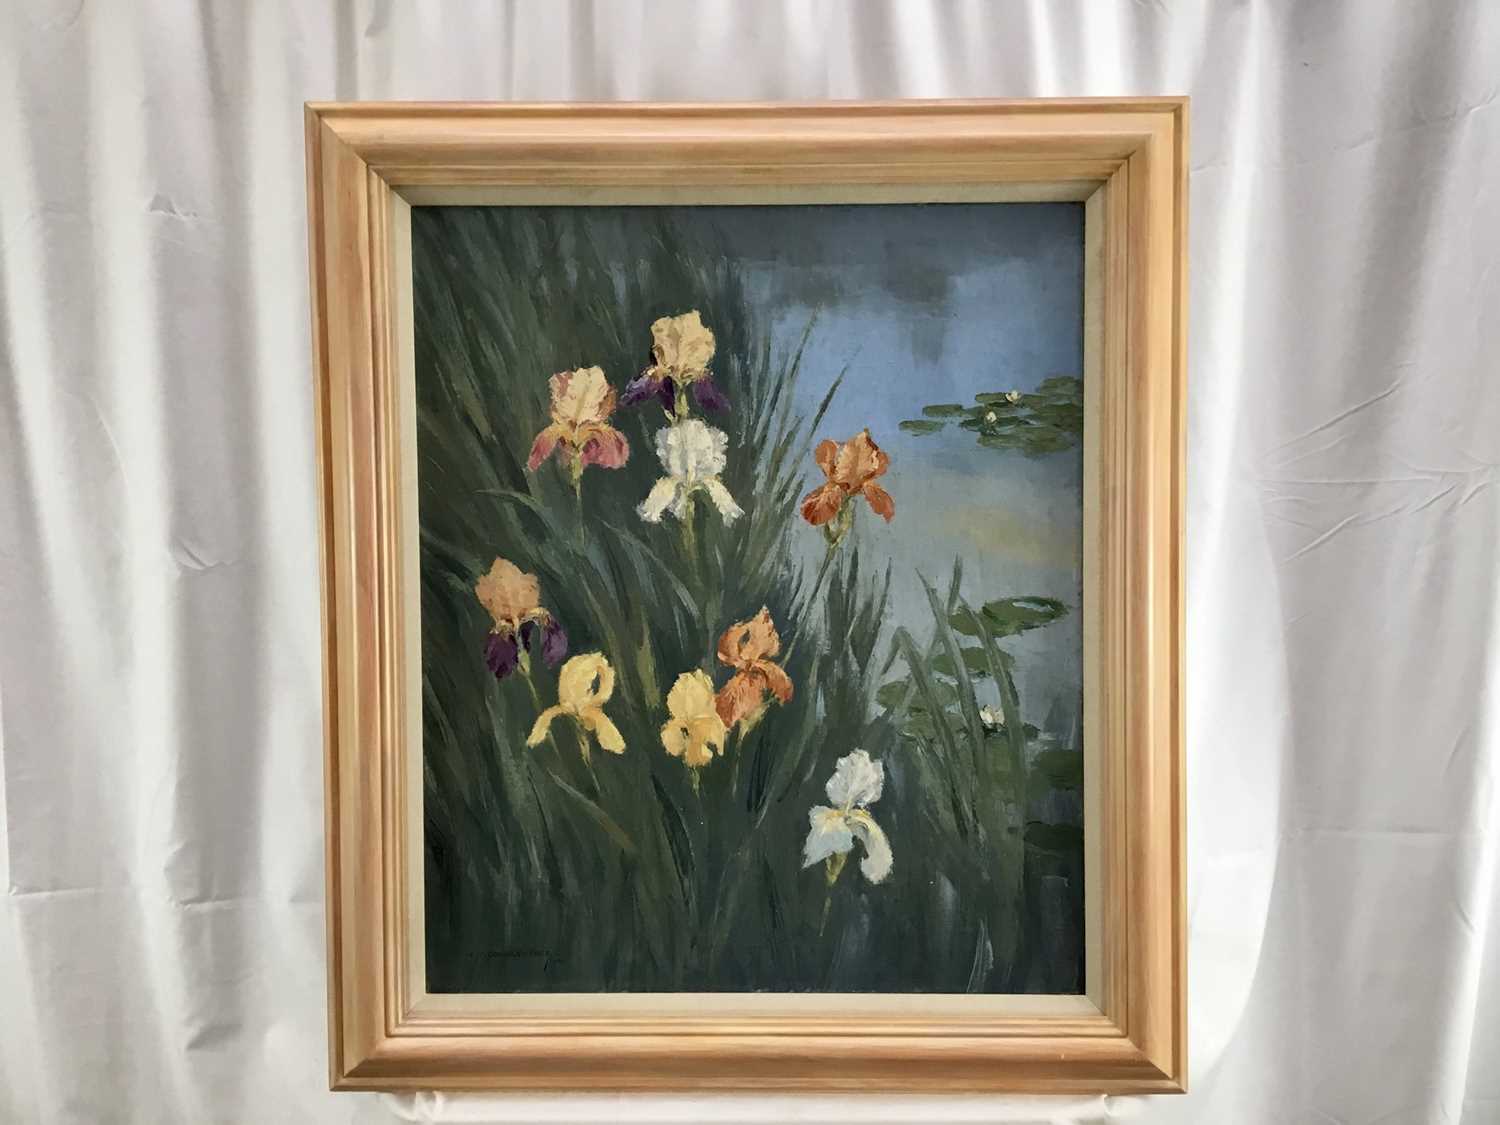 A. V. Coverley-Price (1901-1948) oil on canvas - 'Irises', signed and dated 1948, 55cm x 65cm, frame - Image 2 of 10